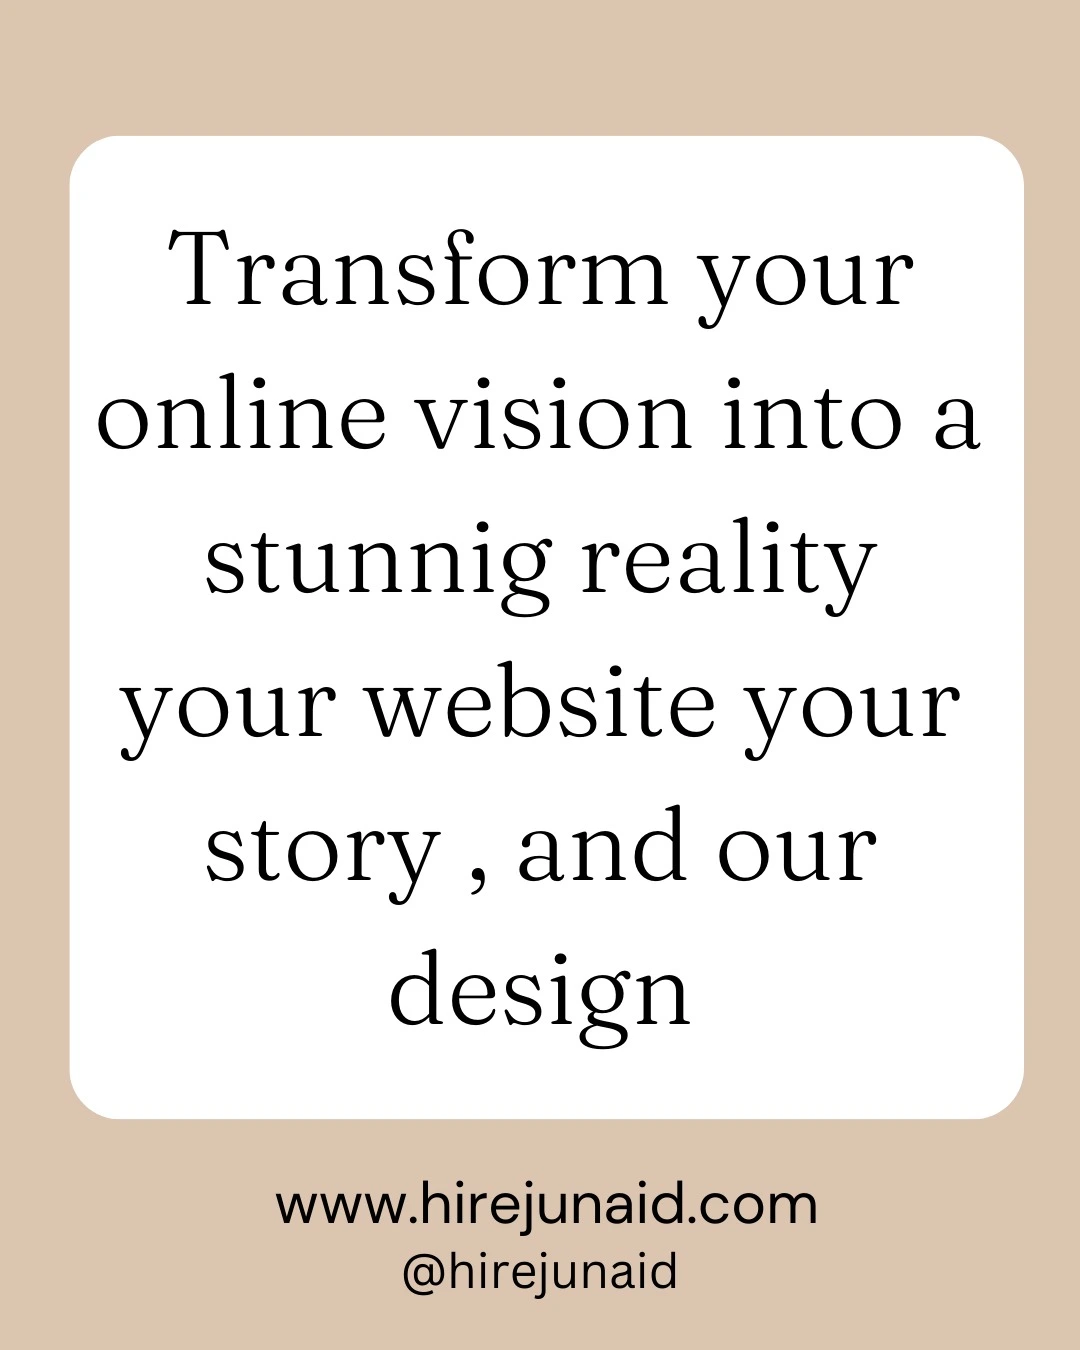 Transform your online vision into a stunning reality